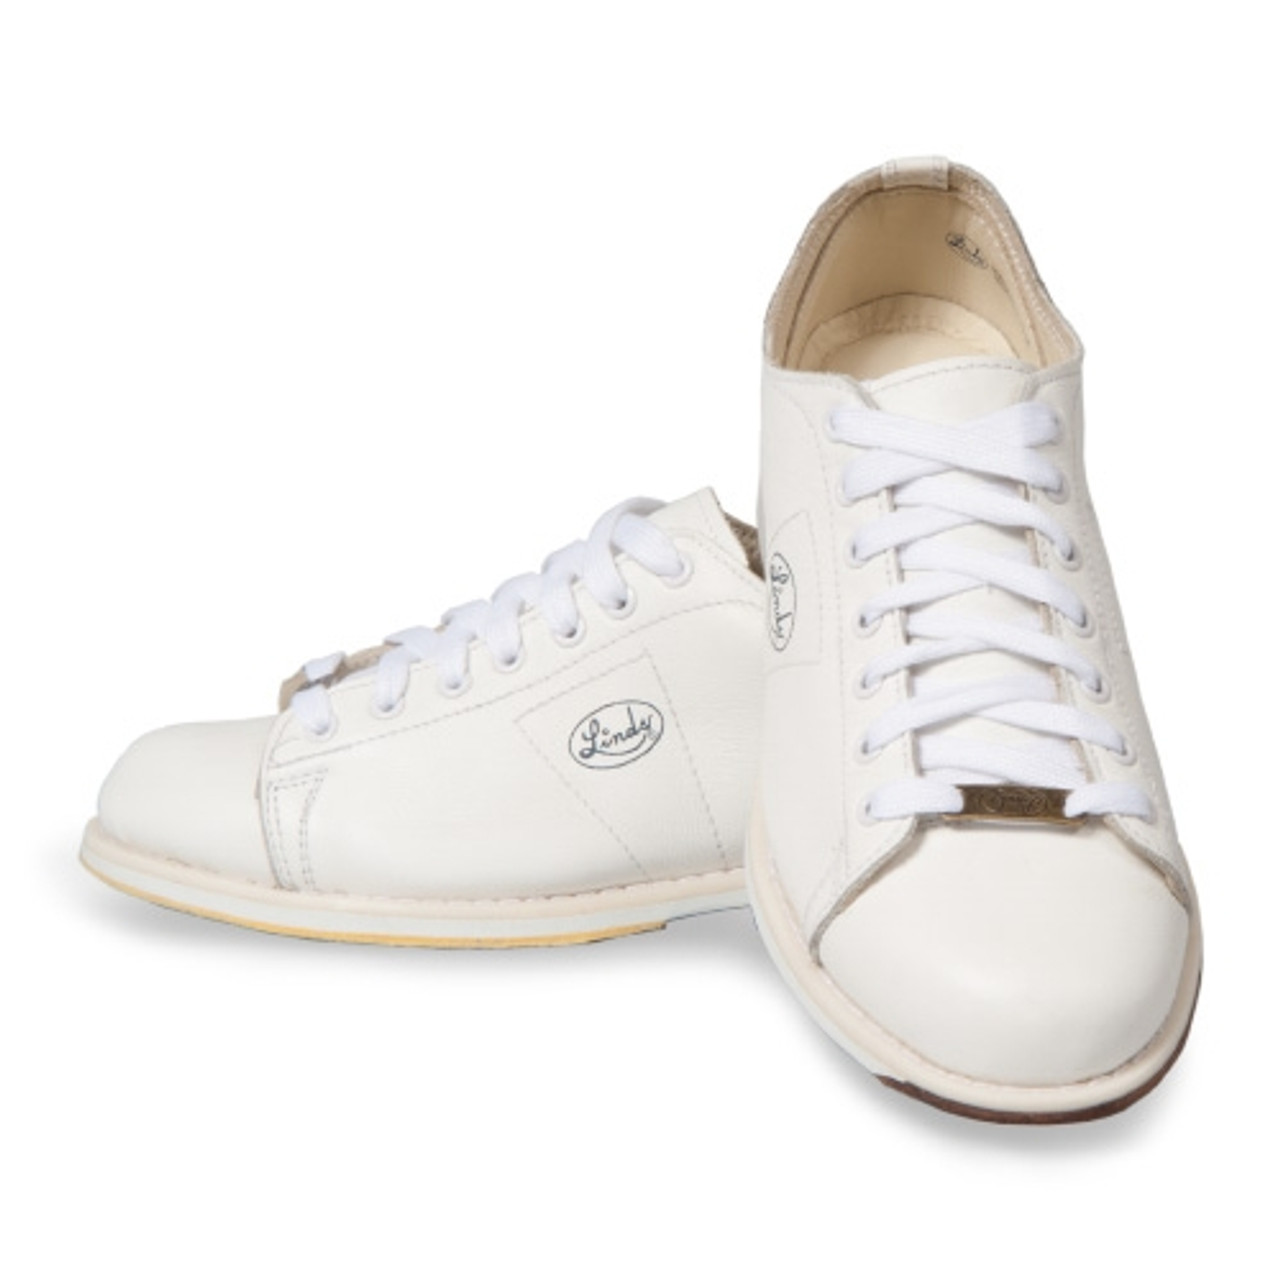 Linds Classic Mens Bowling Shoes White 